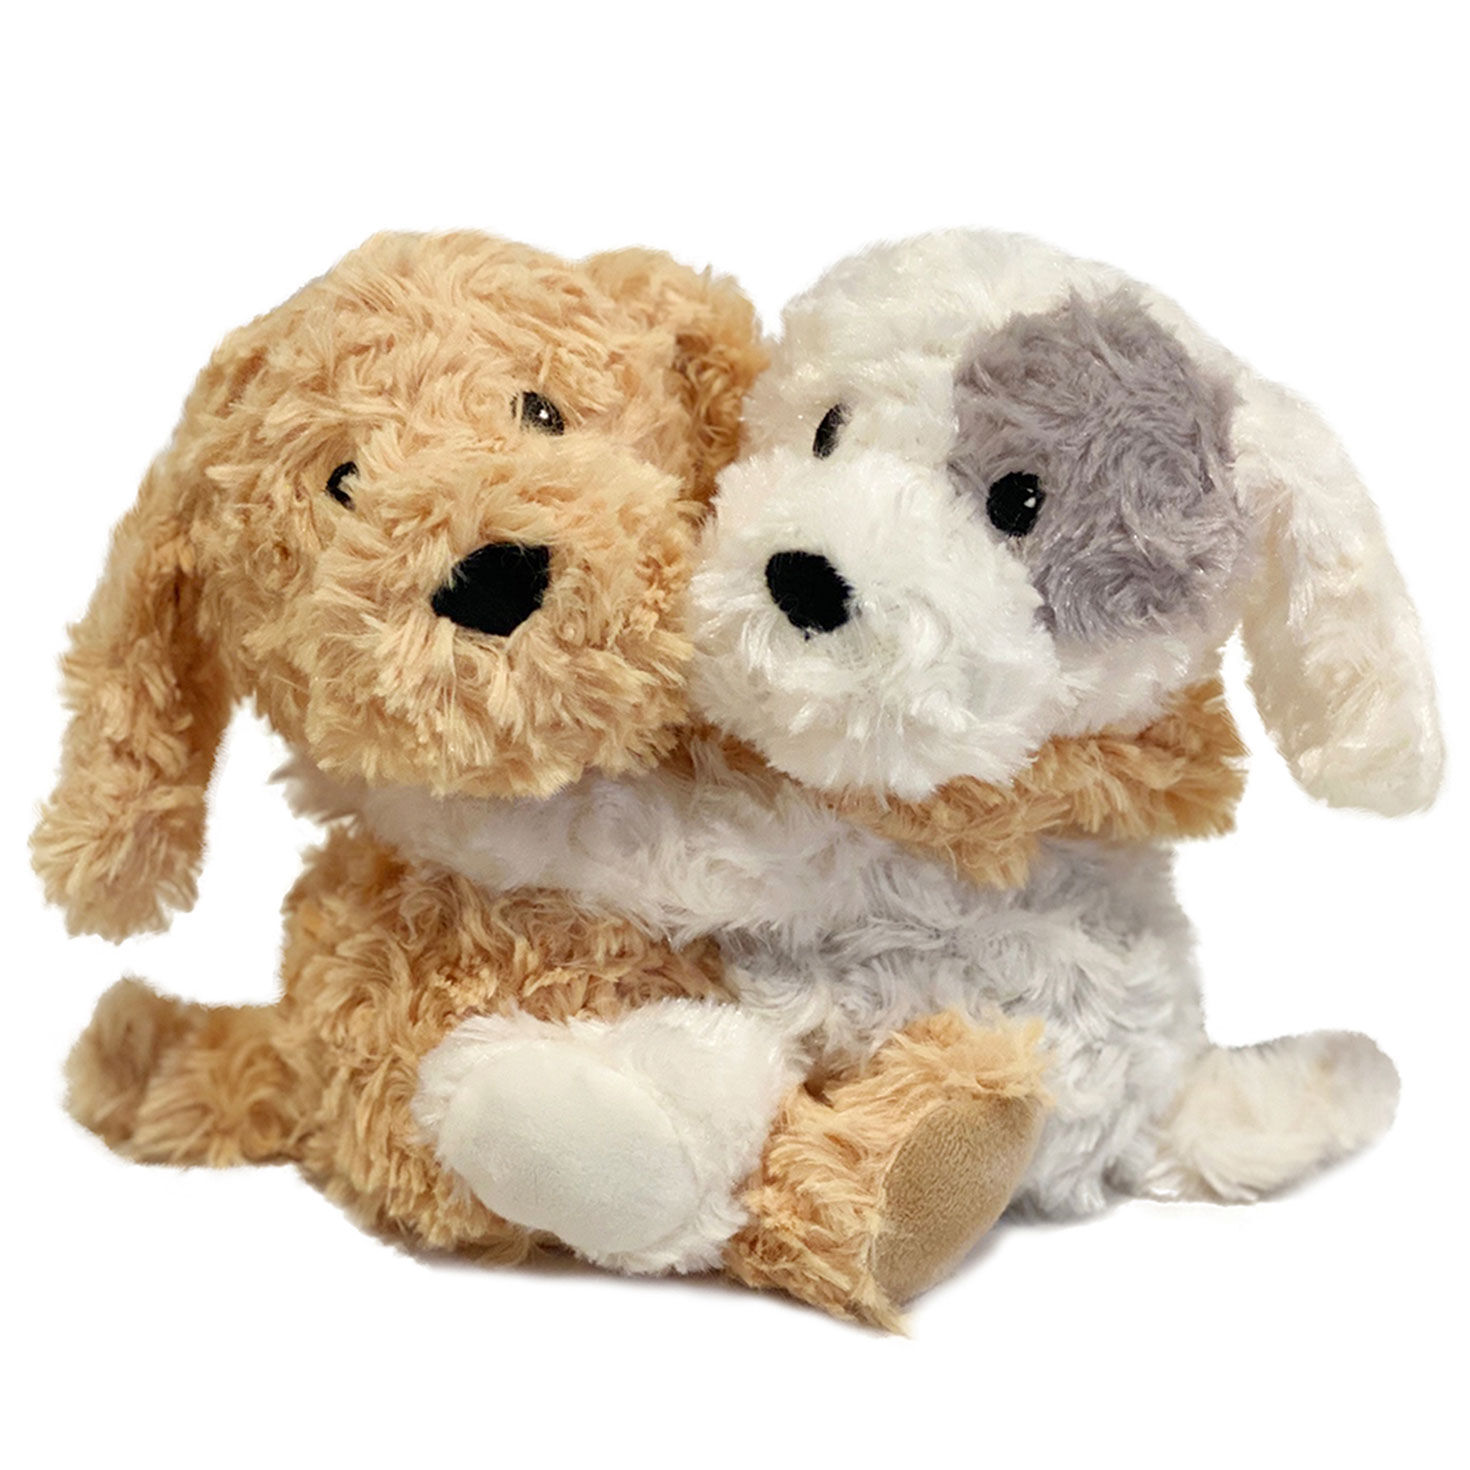 Warmies Hugs Heatable Scented Puppy Stuffed Animals, Set of 2 for only USD 21.99 | Hallmark